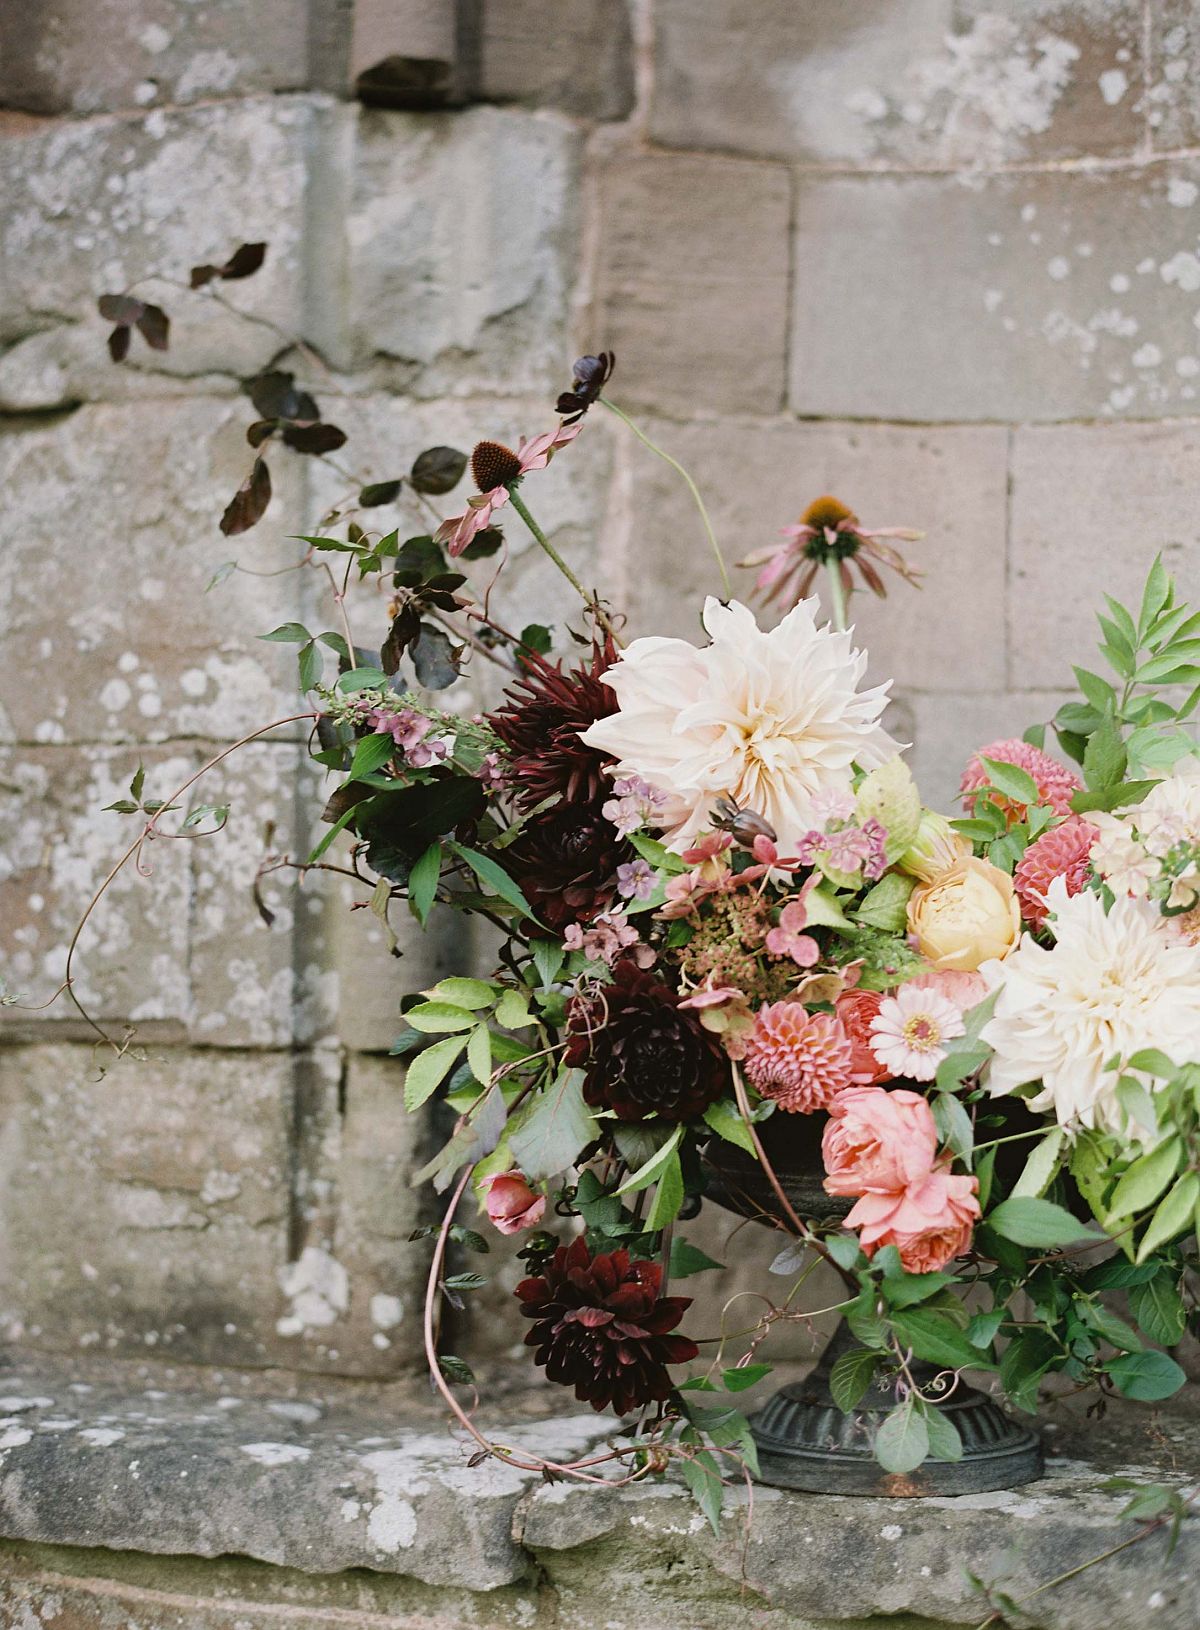 Modern and Earthy Autumnal Vow Renewal